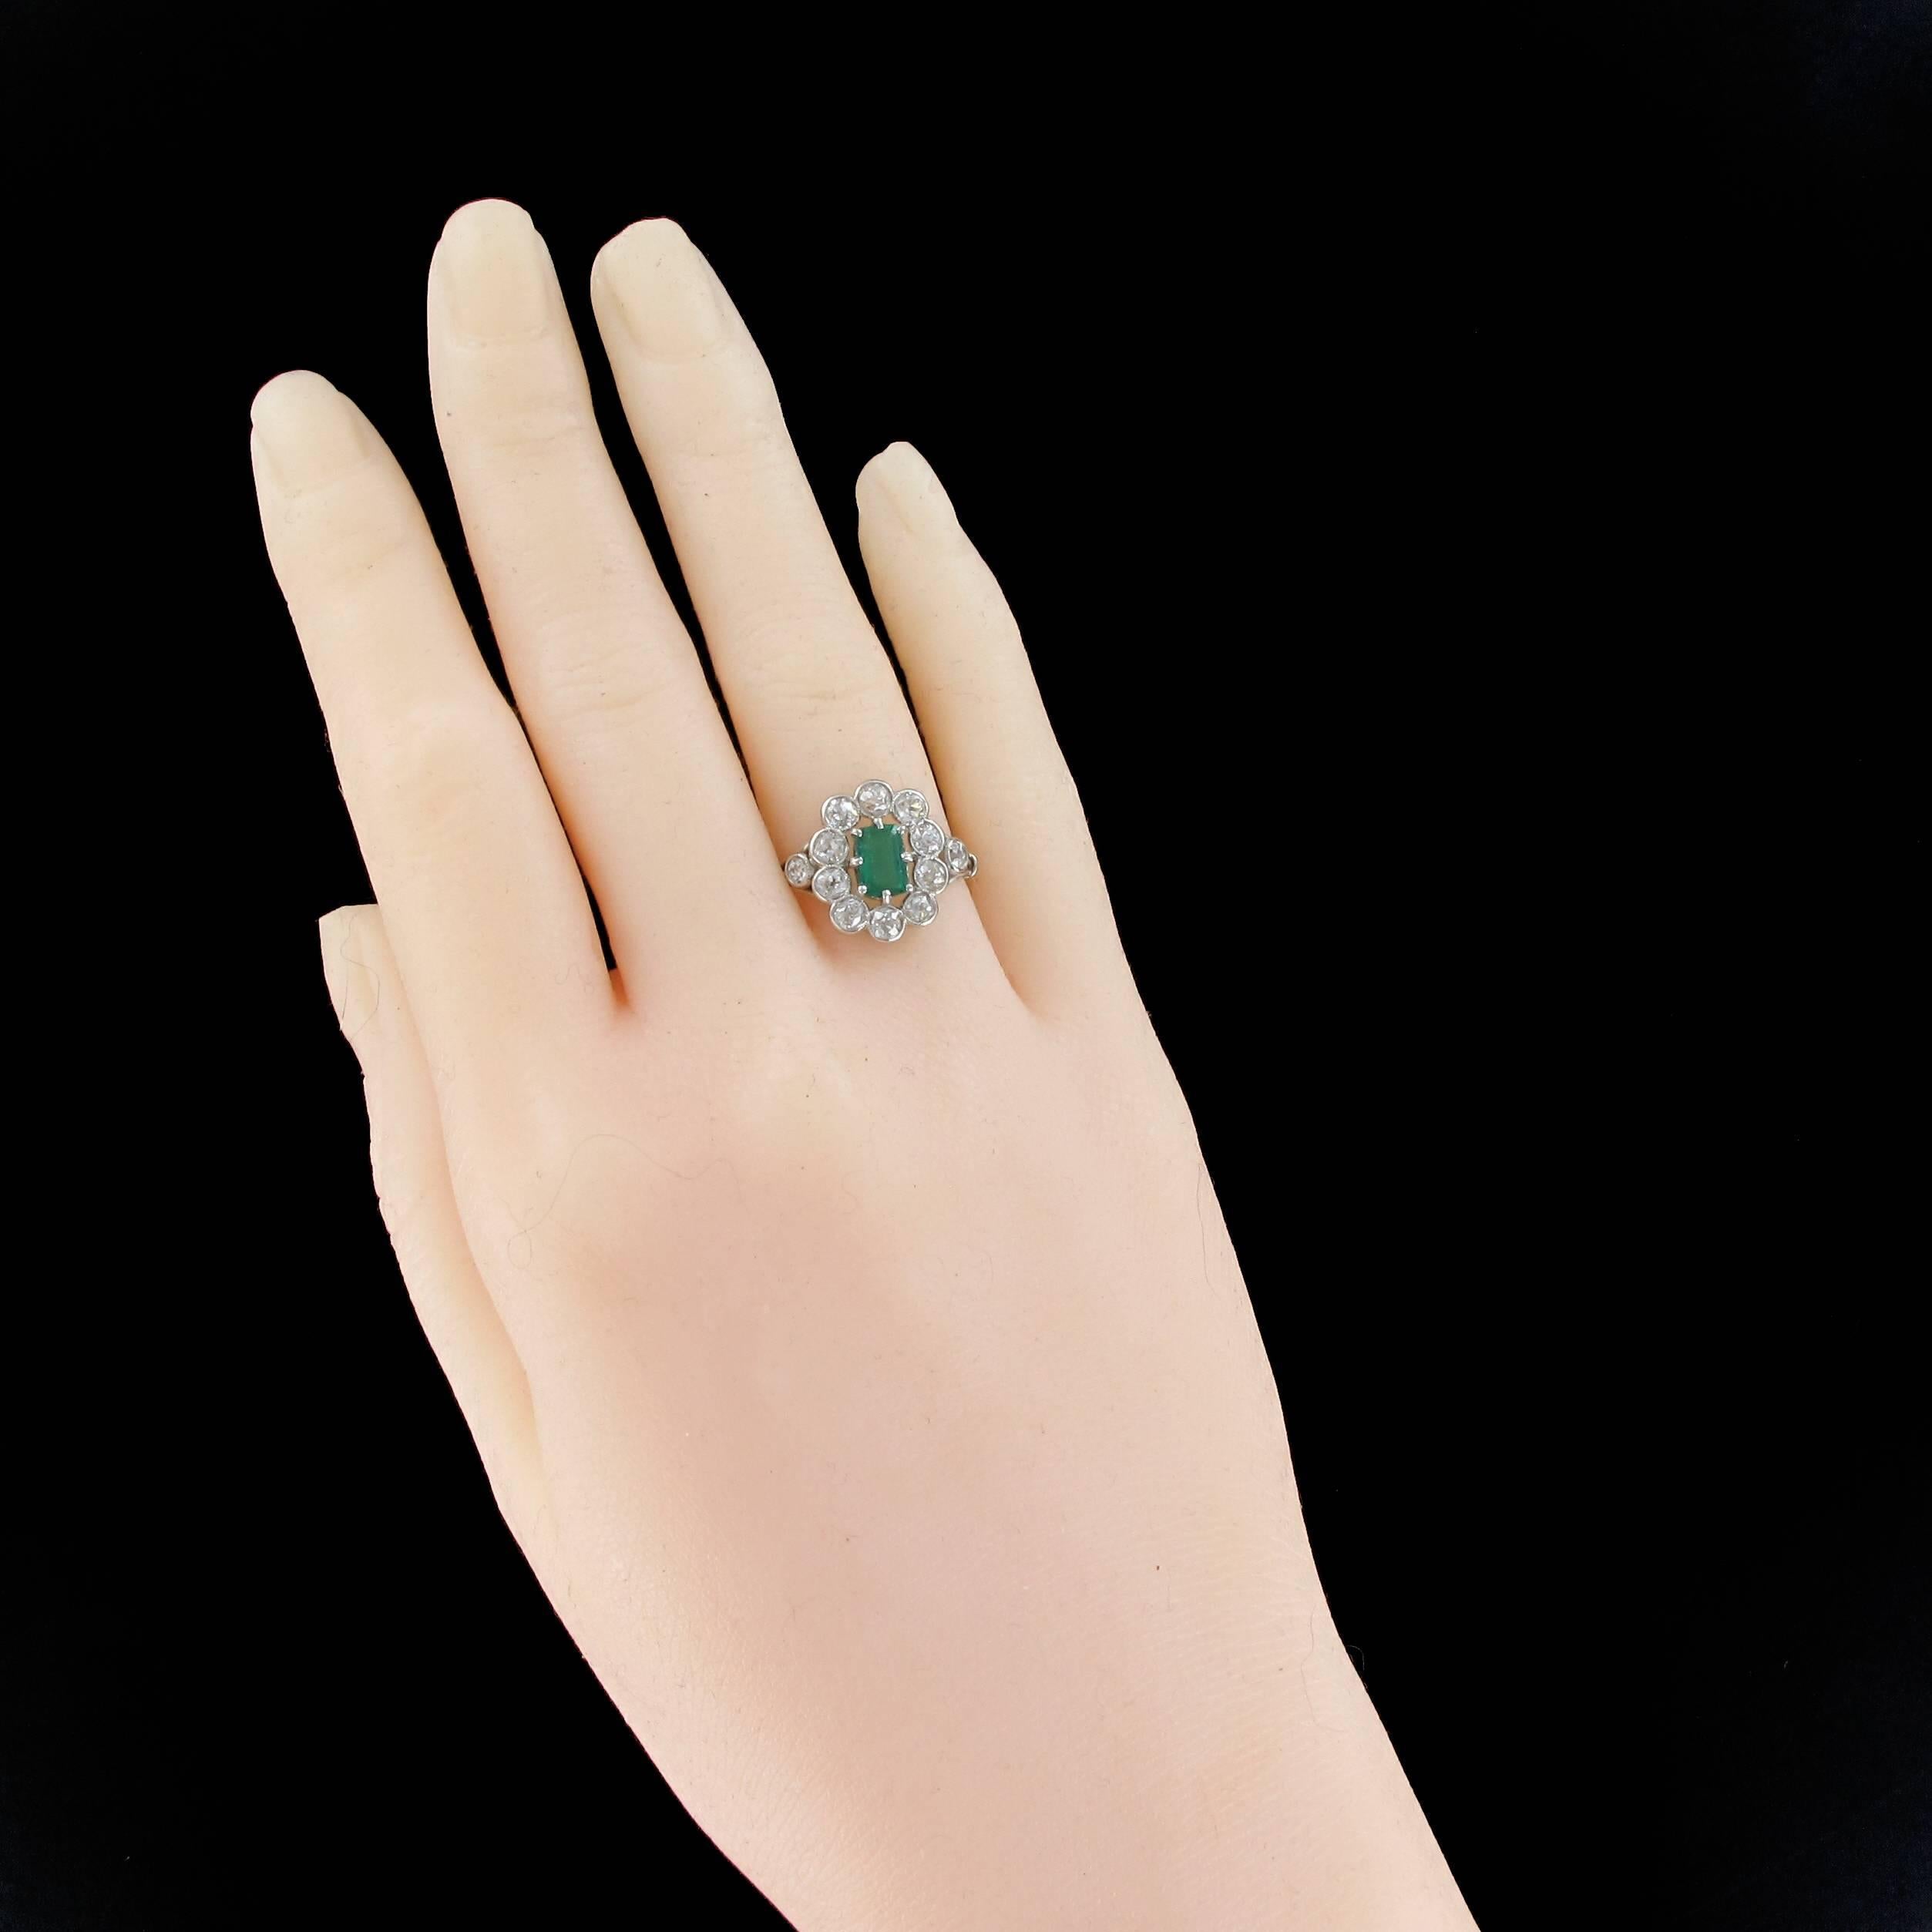 Ring in 18 carats white gold. 

Absolutely splendid, this antique ring is set with 8 claws on its top of an intense green emerald surrounded by 10 antique brilliant cut diamonds in millegrains set. On either side, another diamond is set on the start